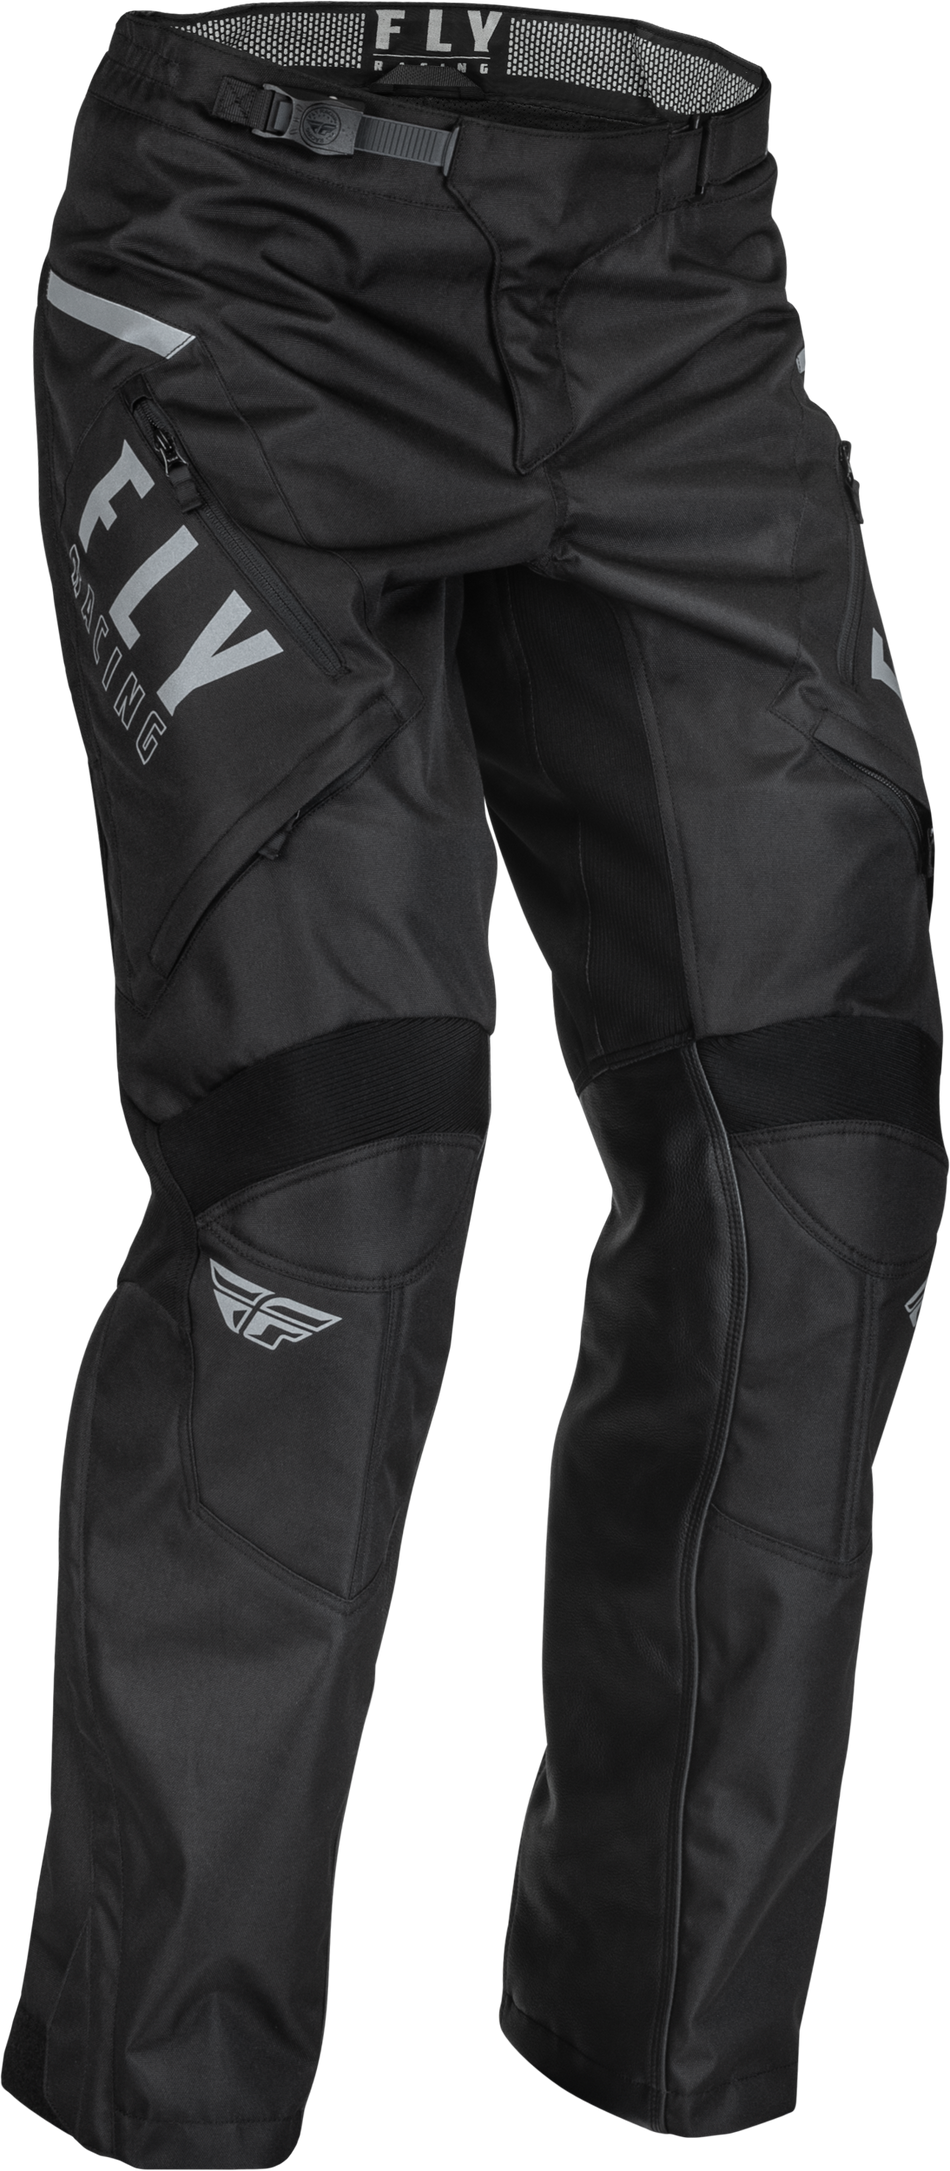 FLY RACING Patrol Over-Boot Pants Black/White Sz 30 376-64030